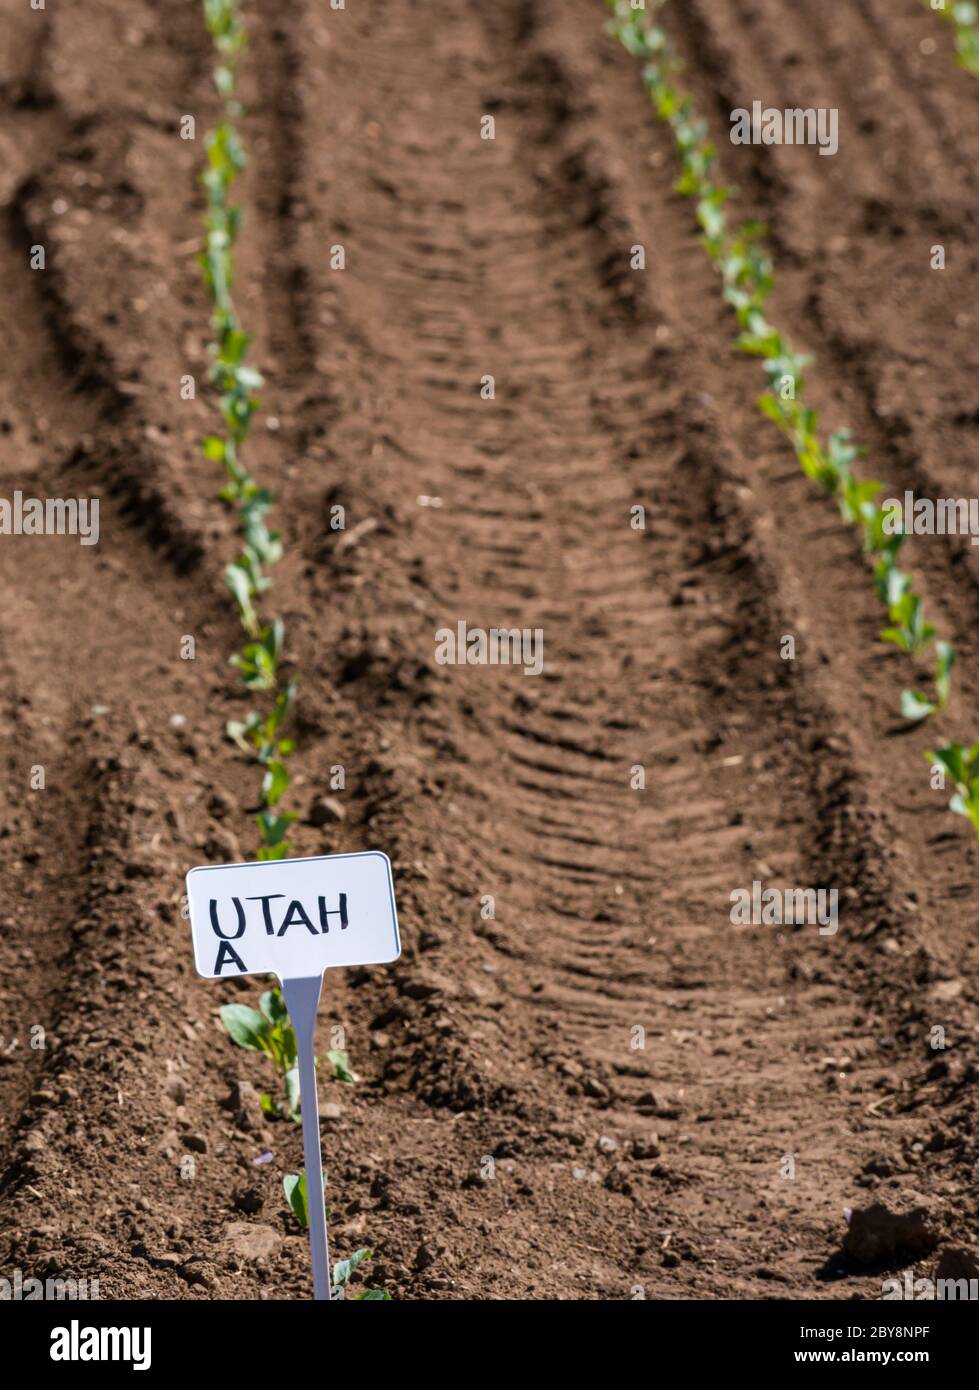 Rows of labelled cabbage plant seedlings growing in field, East Lothian, Scotland, UK Stock Photo